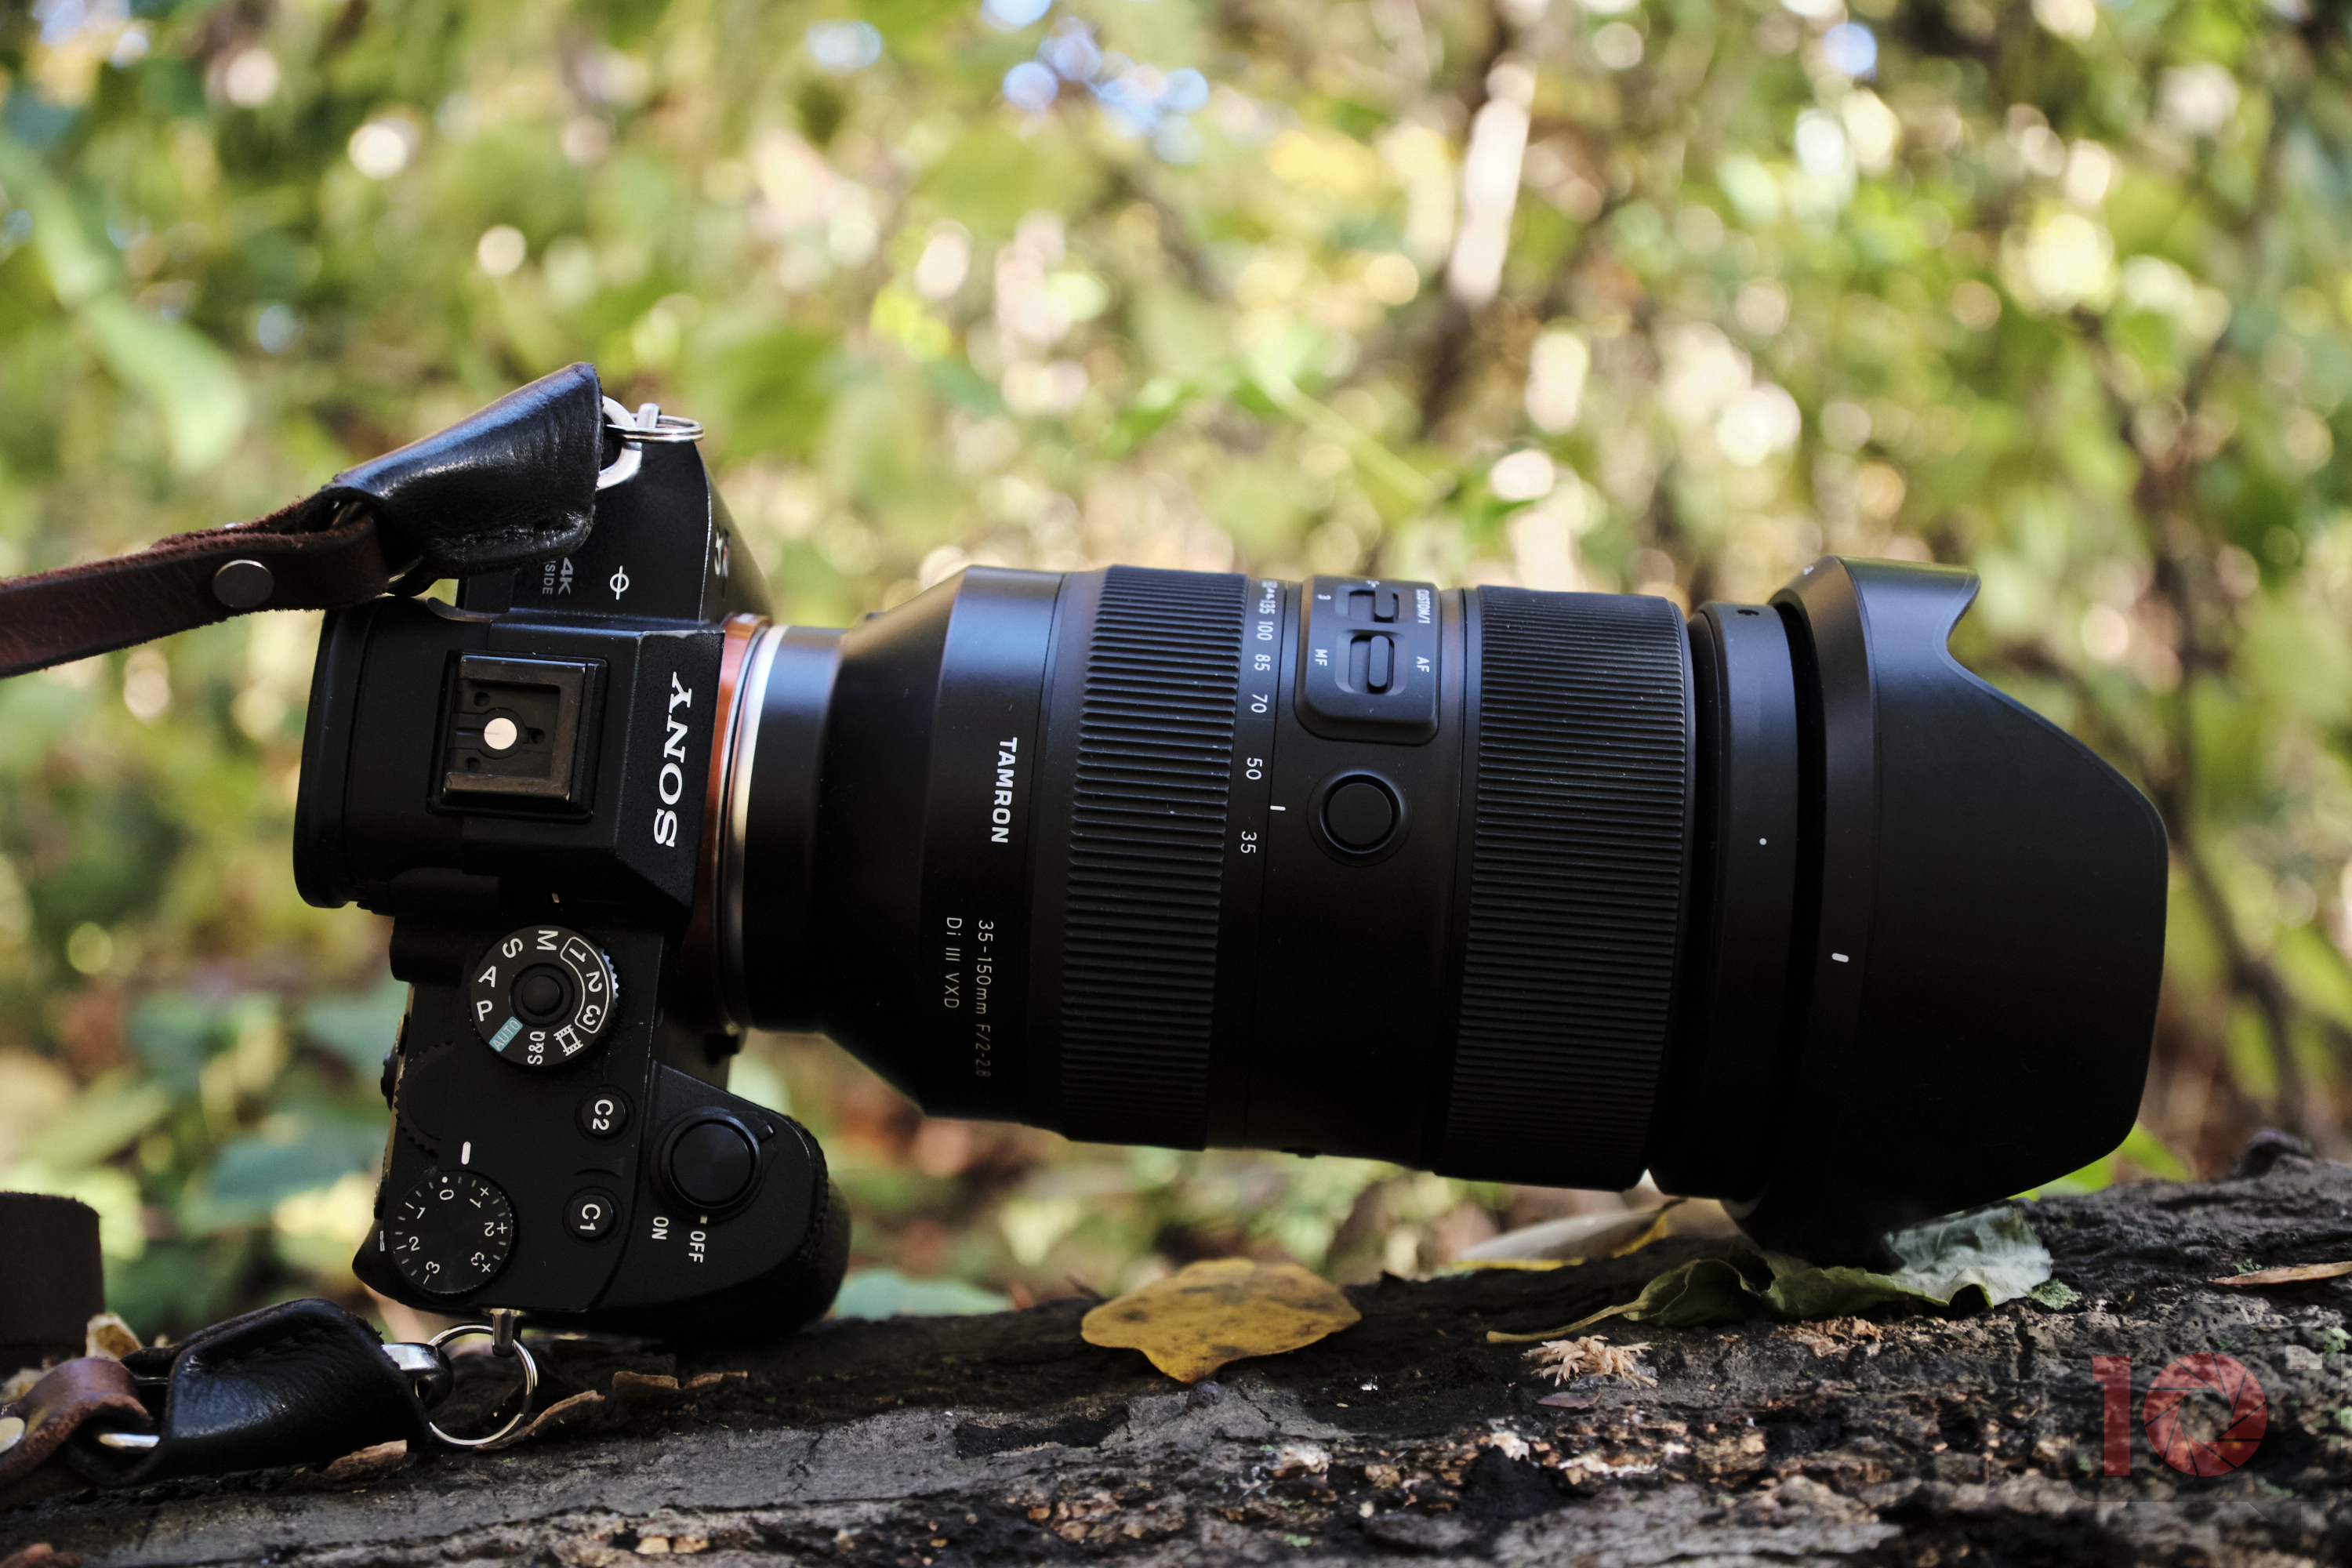 Chris Gampat The Phoblographer Tamron 28-75mm f2.8 G2 review product images 41-90s1600